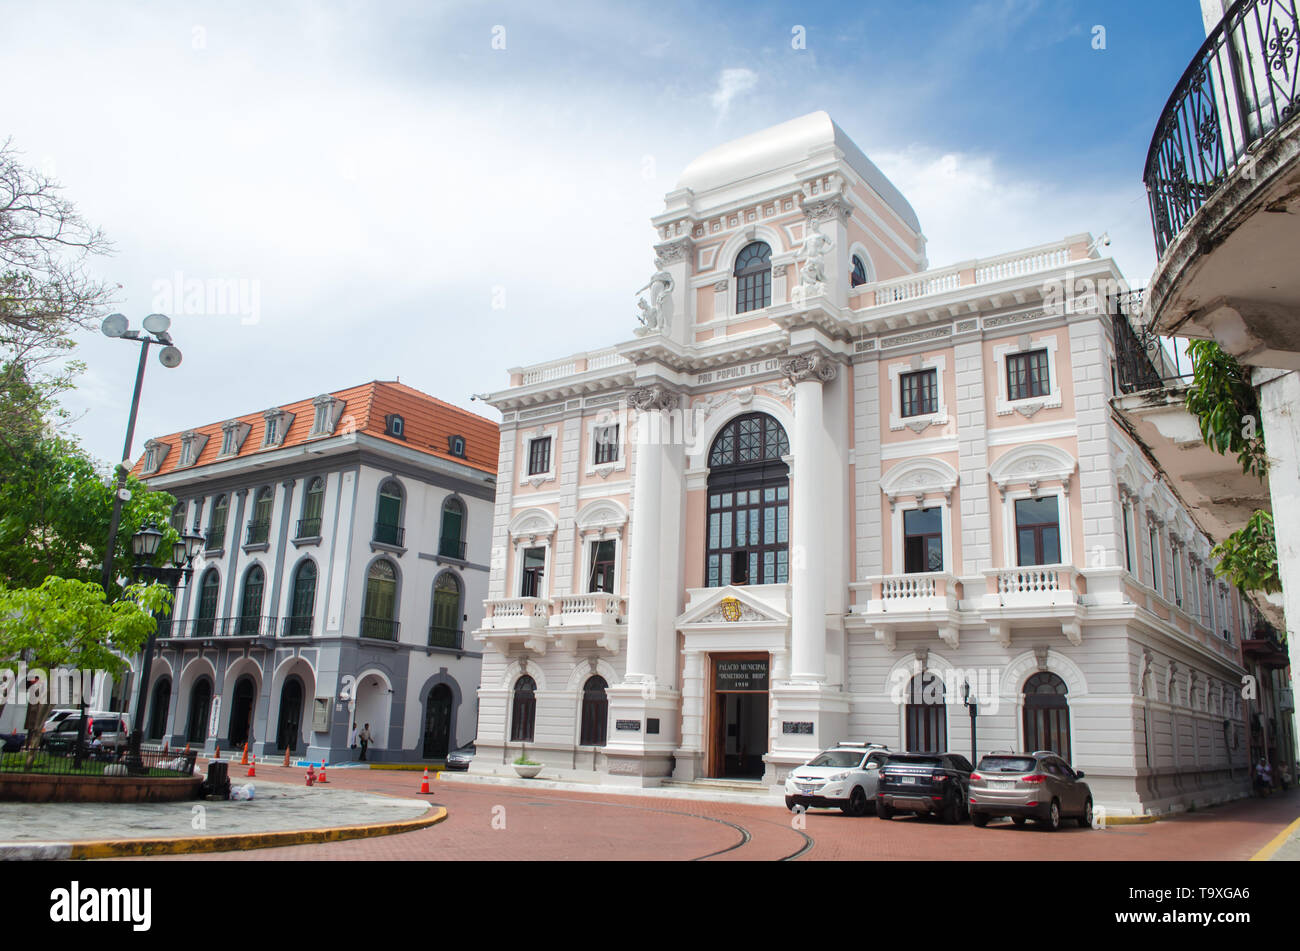 Two historical buildings of the Old Panama City.  Panama Canal Museum can be seen on the left; on the right stands the Municipal Palace building. Stock Photo